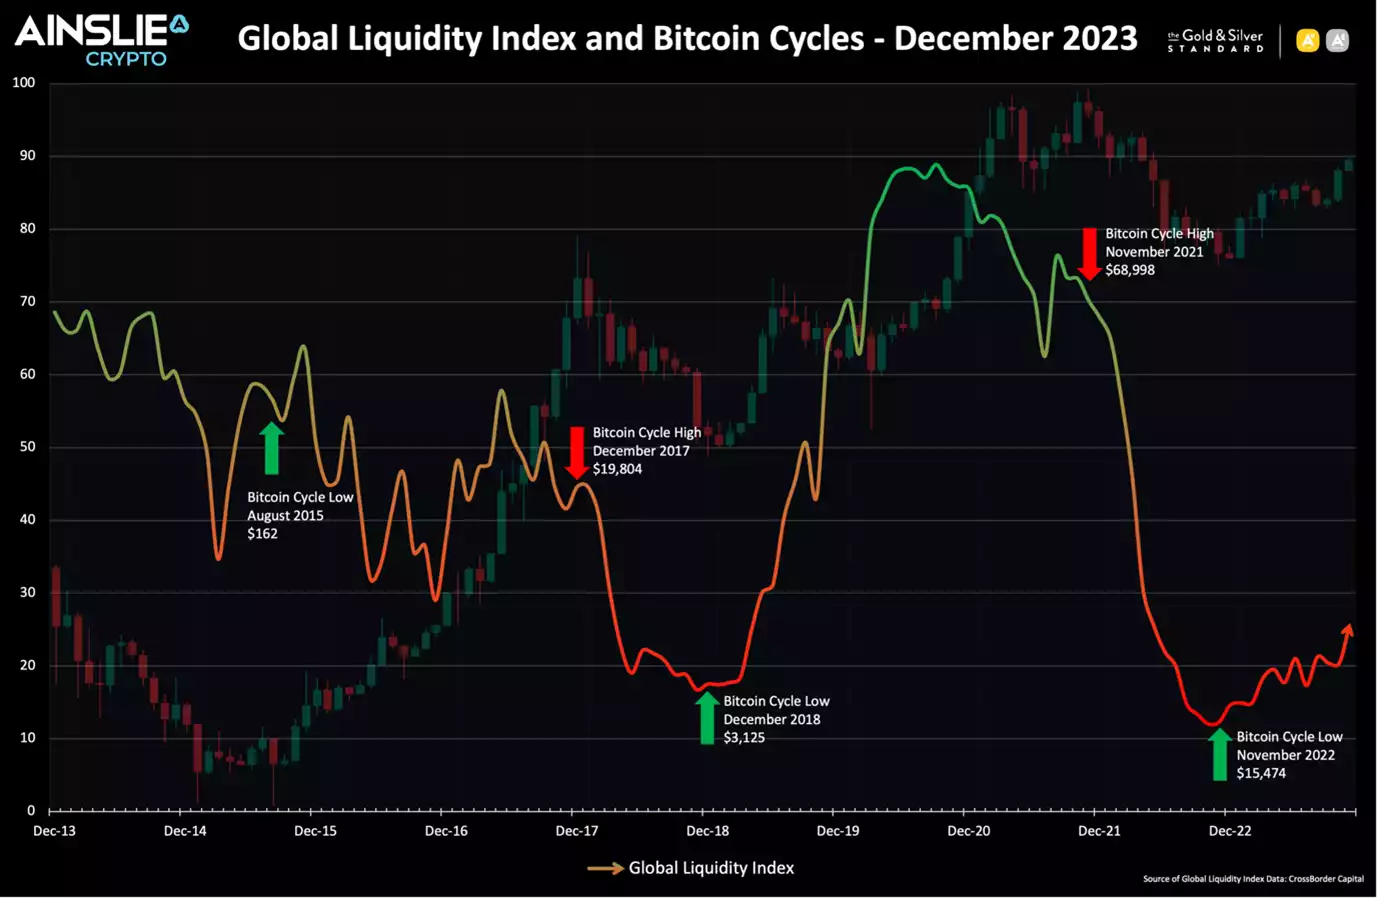 Global Liquidity Index and Bitcoin Cycles - December 2023